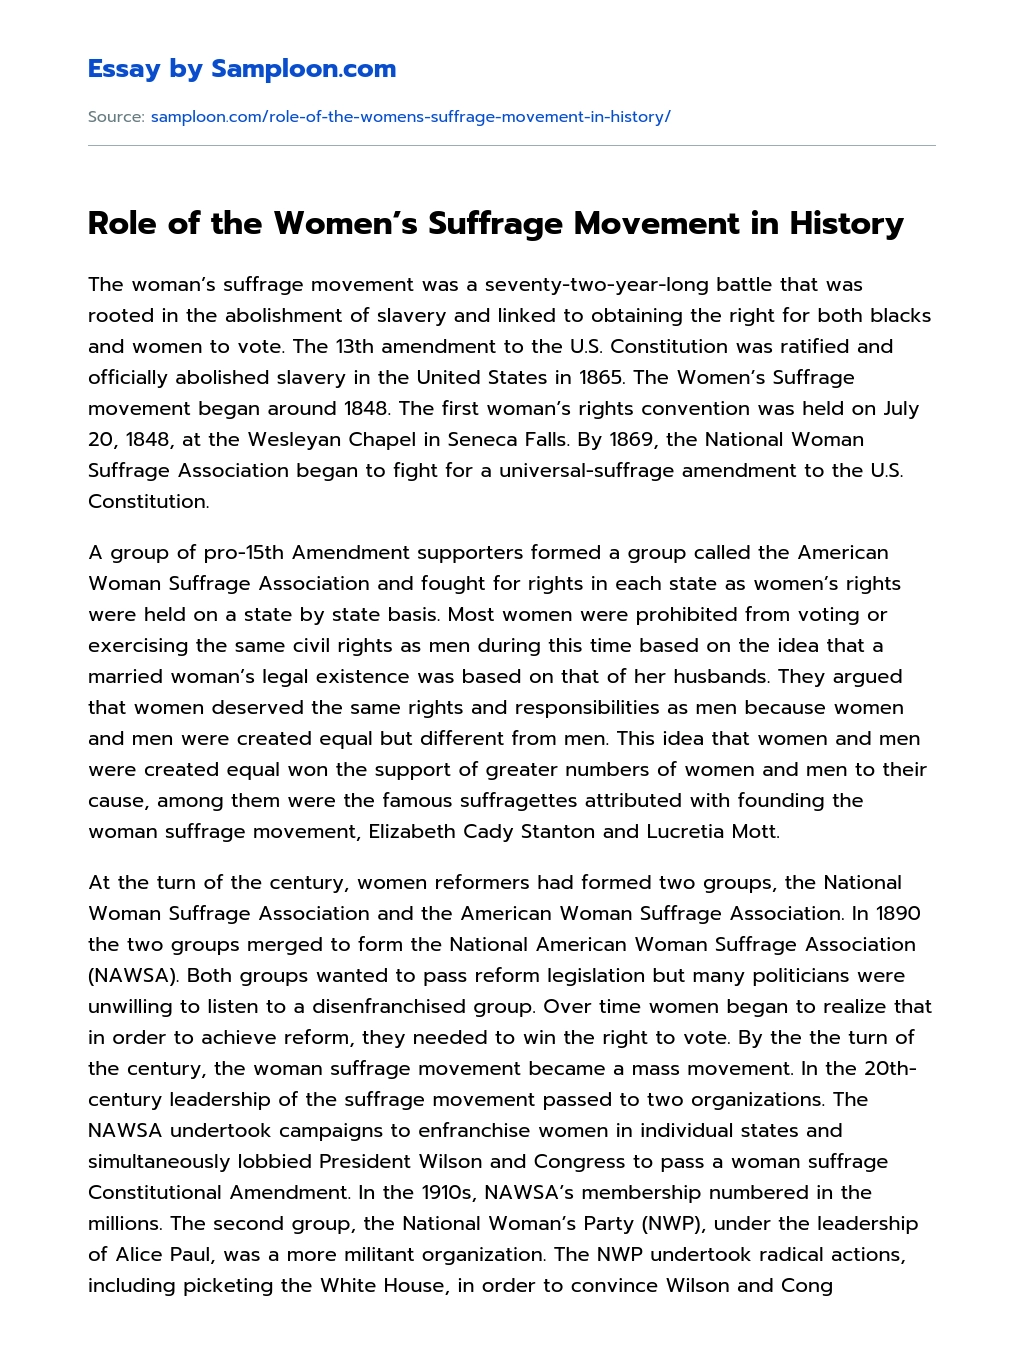 Role of the Women’s Suffrage Movement in History essay